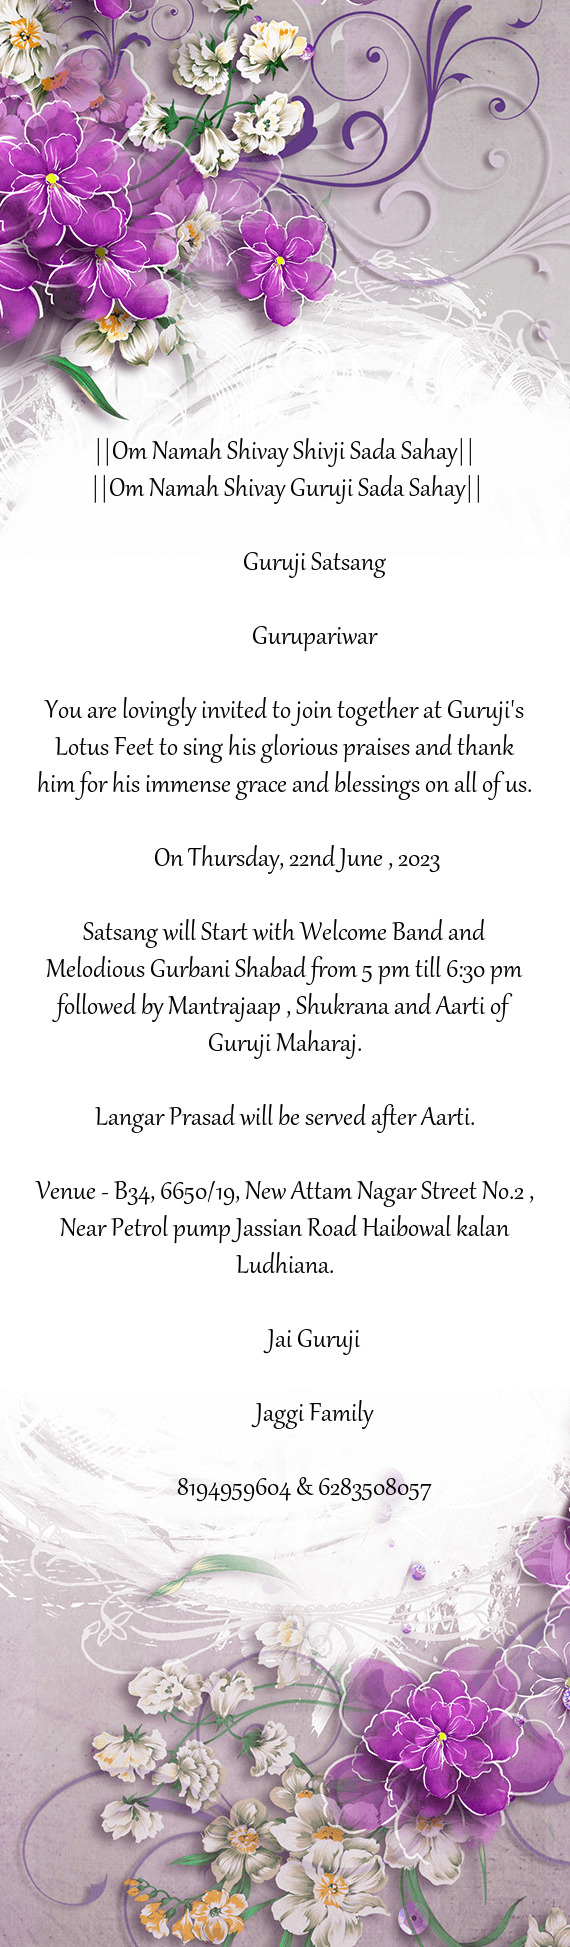 You are lovingly invited to join together at Guruji